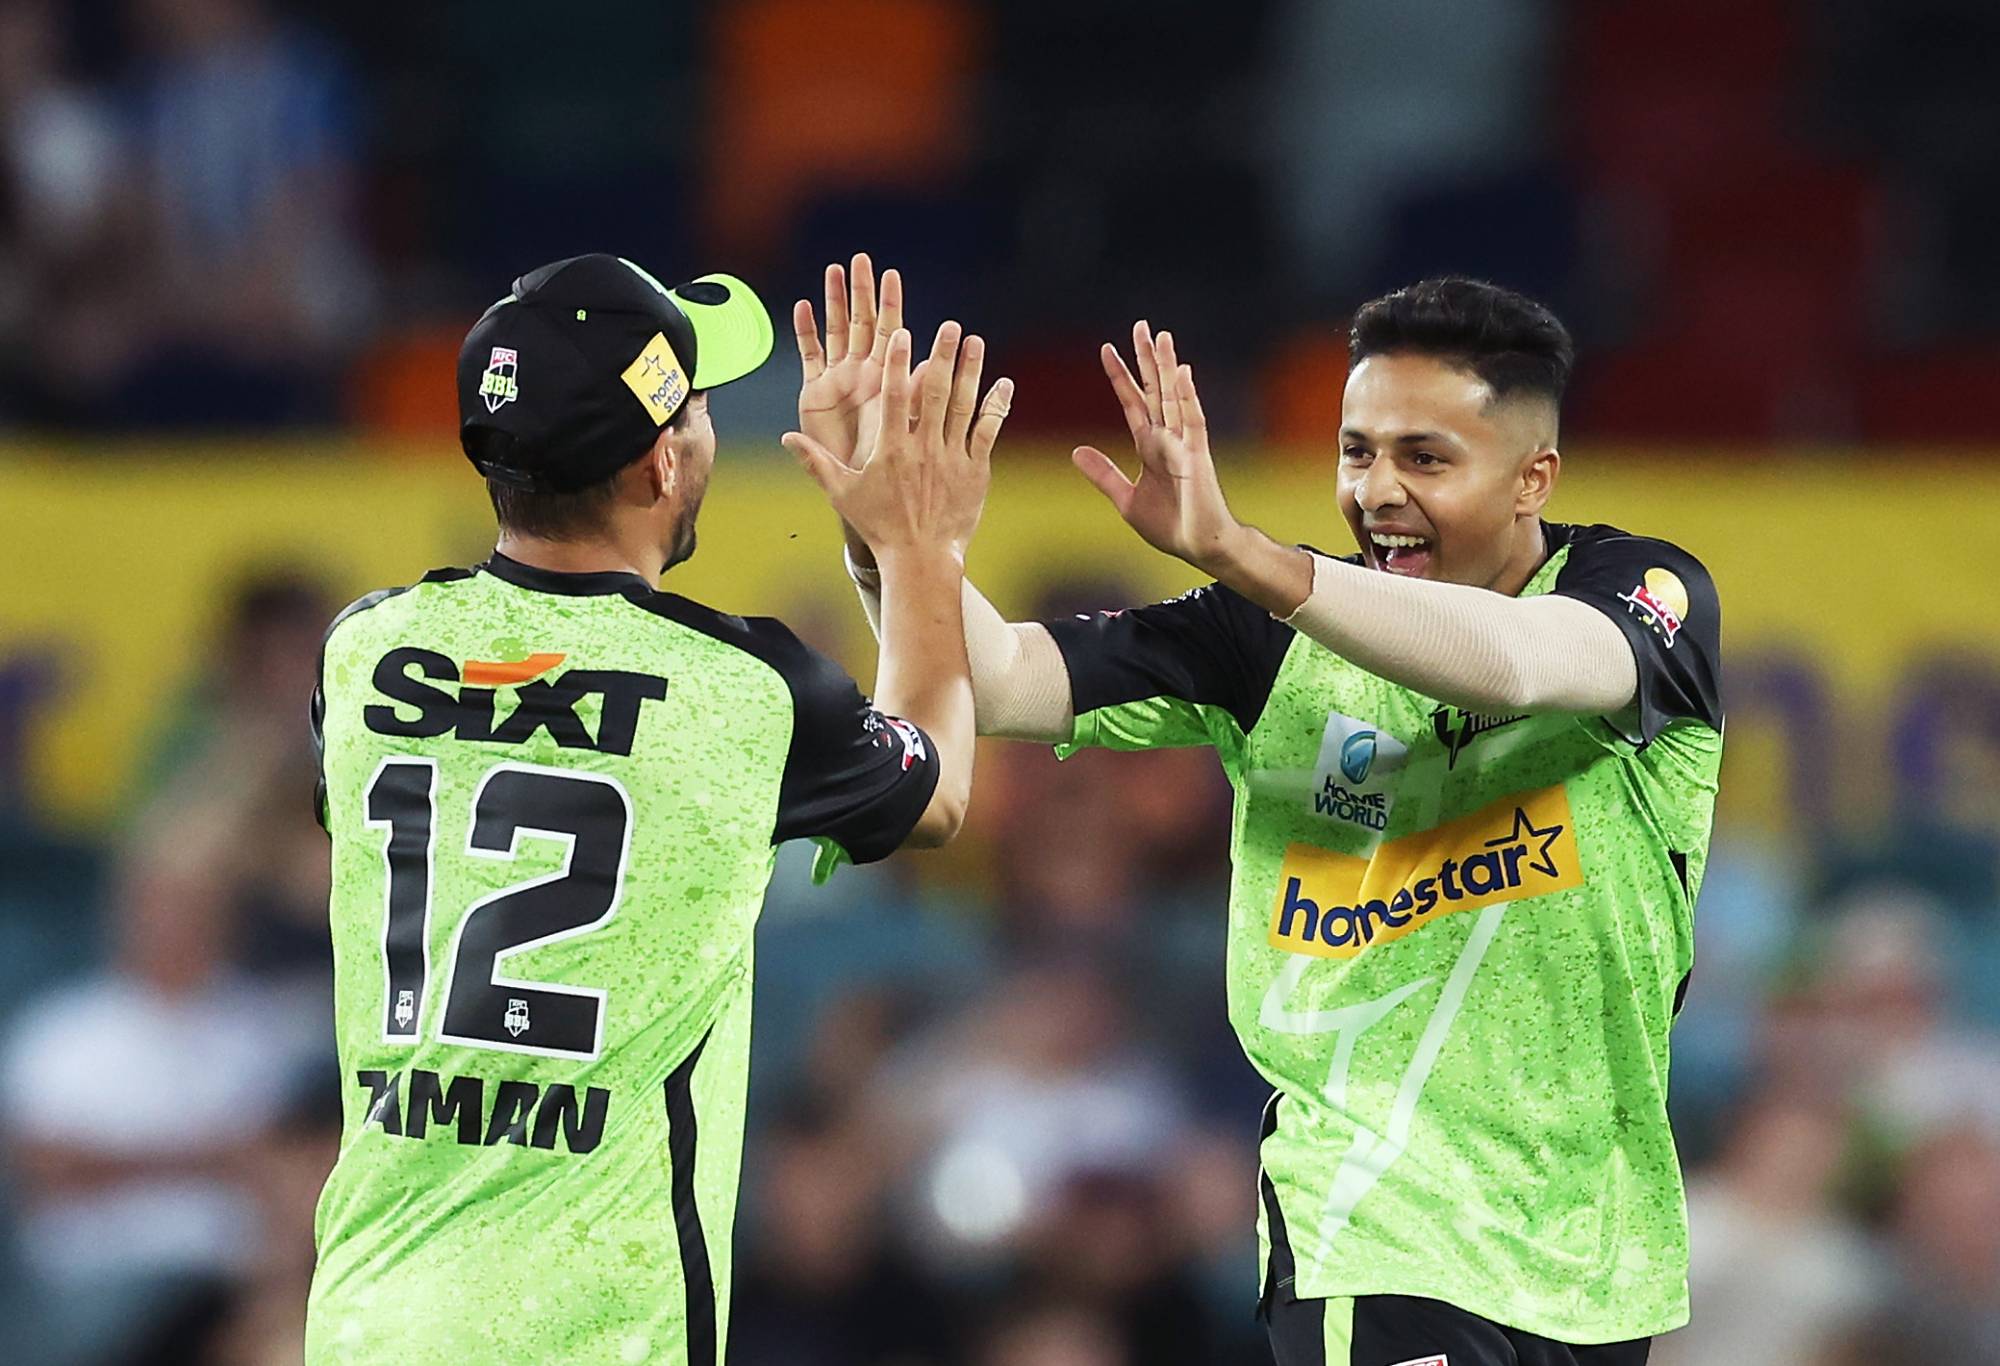 CANBERRA, AUSTRALIA - DECEMBER 12:  Tanveer Sangha of the Thunder celebrates with team mates after taking the wicket of Matt Renshaw of the Heat during the BBL match between Sydney Thunder and Brisbane Heat at Manuka Oval, on December 12, 2023, in Canberra, Australia. (Photo by Matt King/Getty Images)